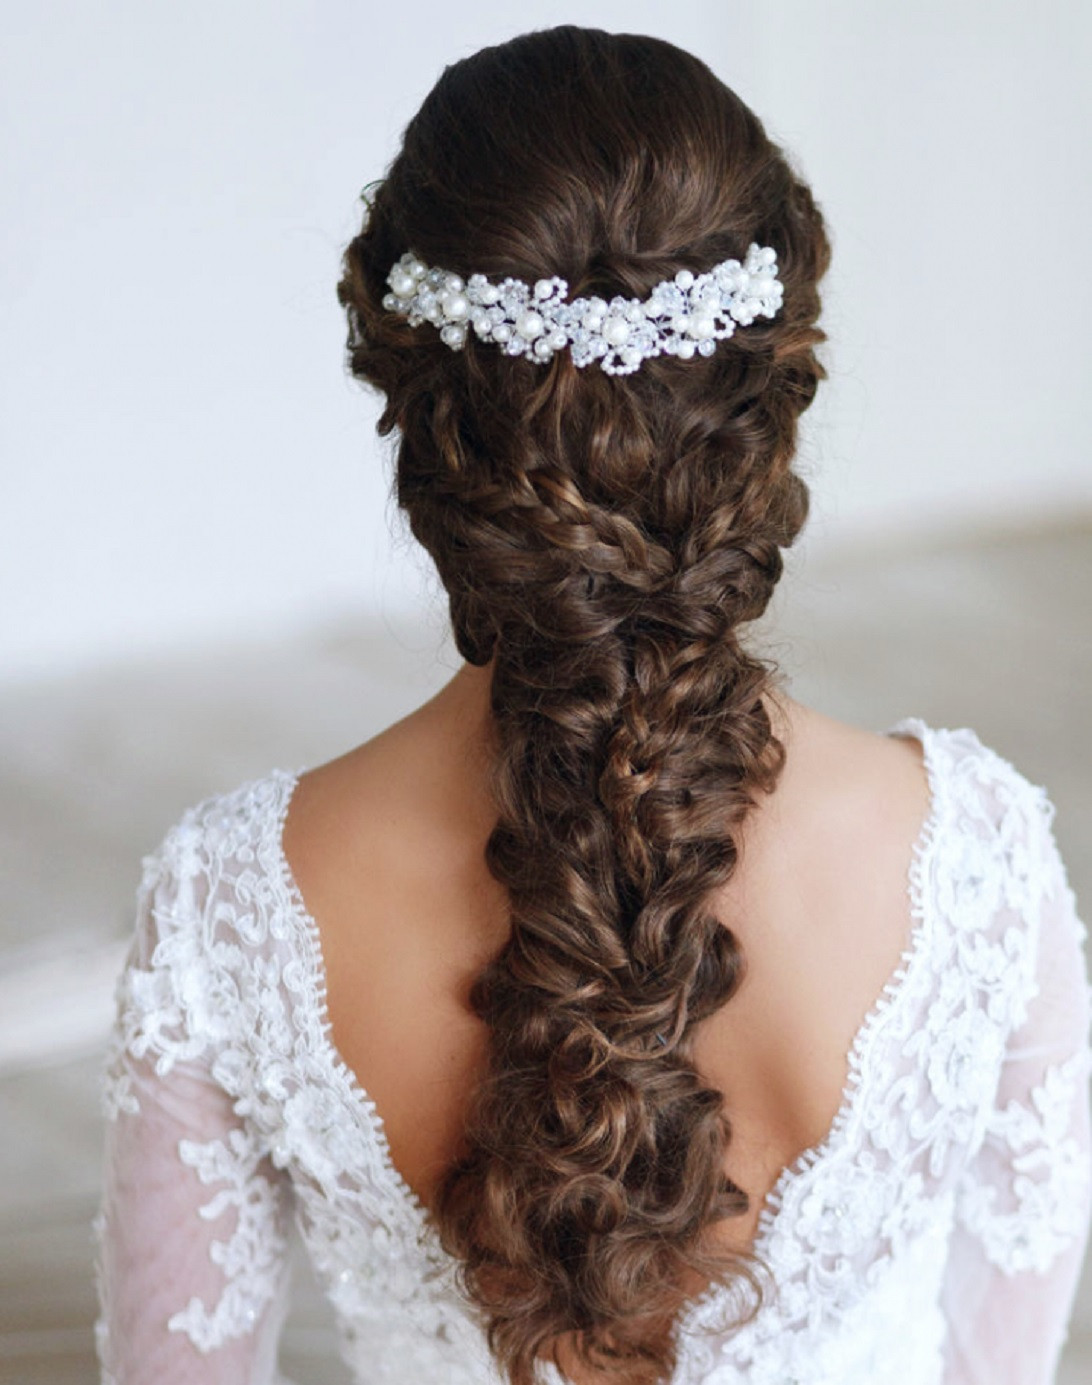 Wedding Hairstyle Braid
 6 Bridal Hairstyle Tips for Your Big day